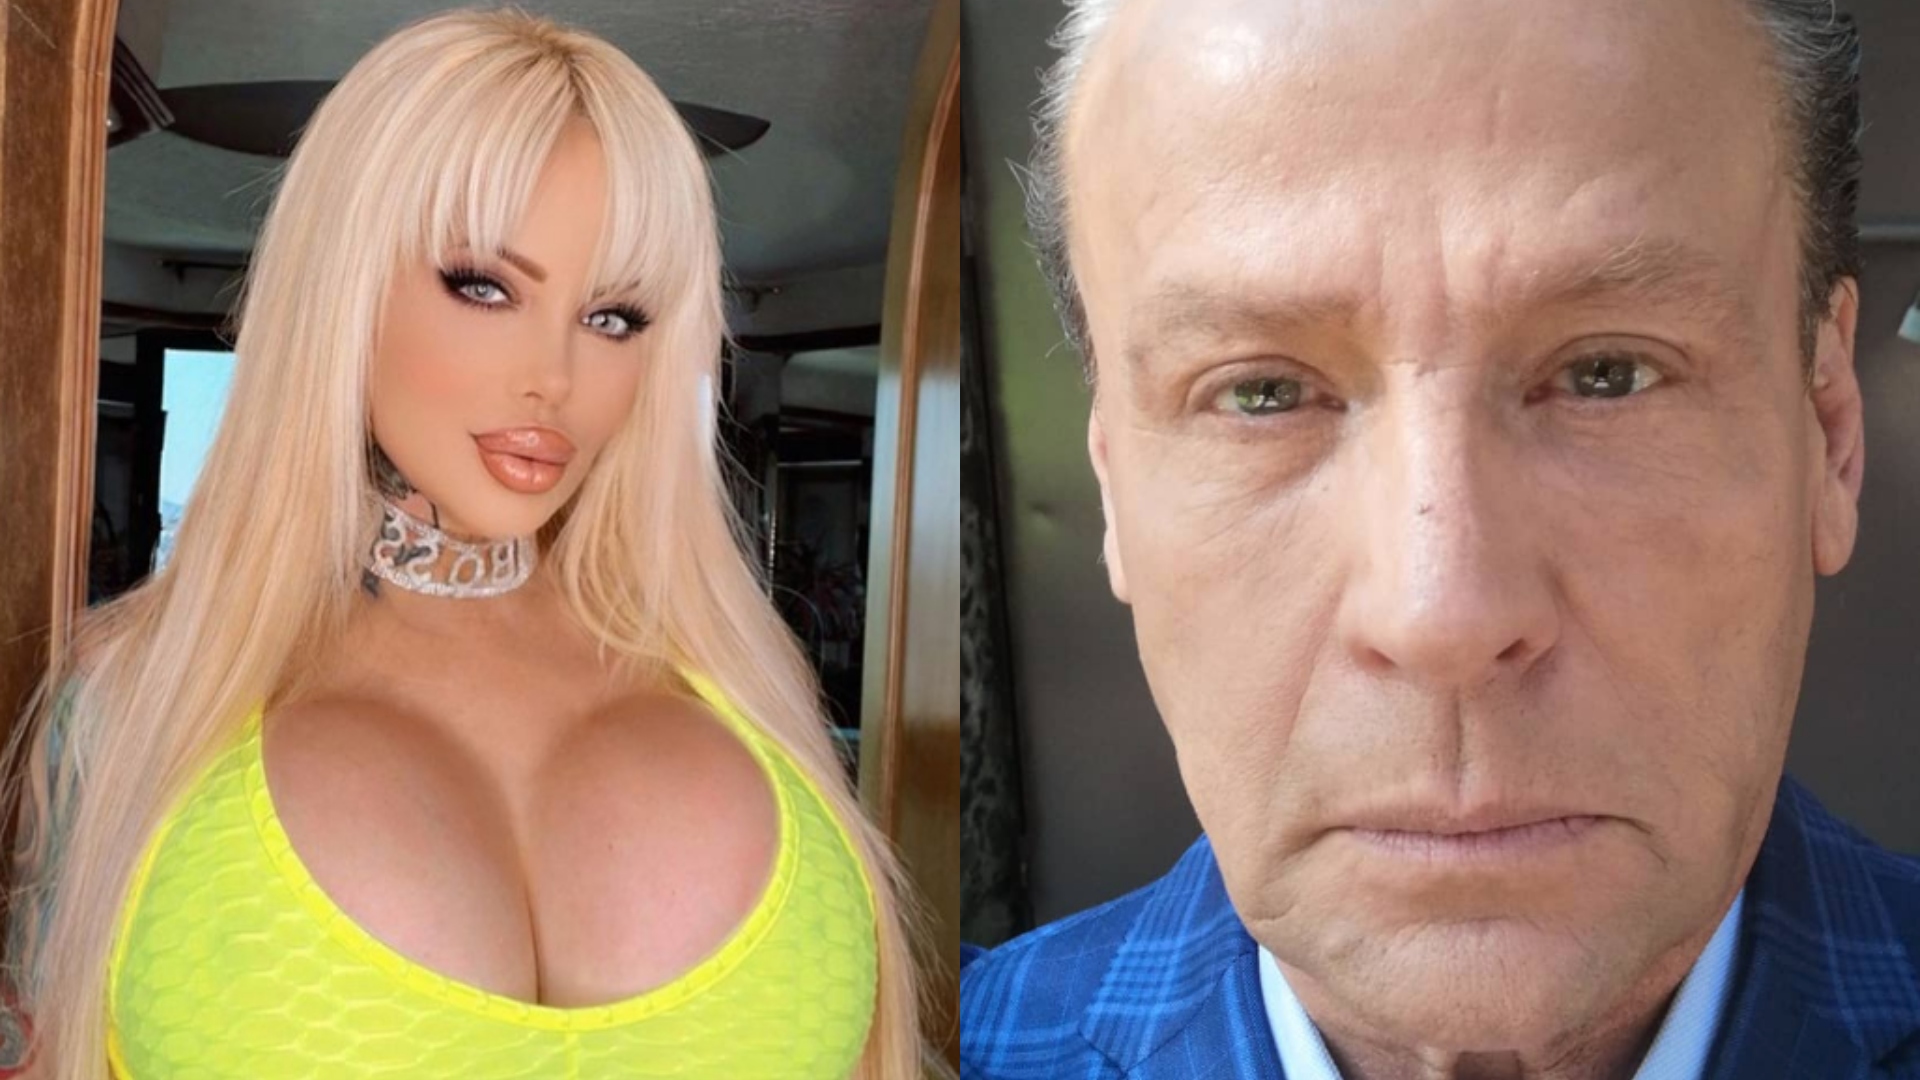 Sabrina Sabrok wants to pay Alfredo Adame for participating in intimate  videos 'fighting with someone' - Infobae